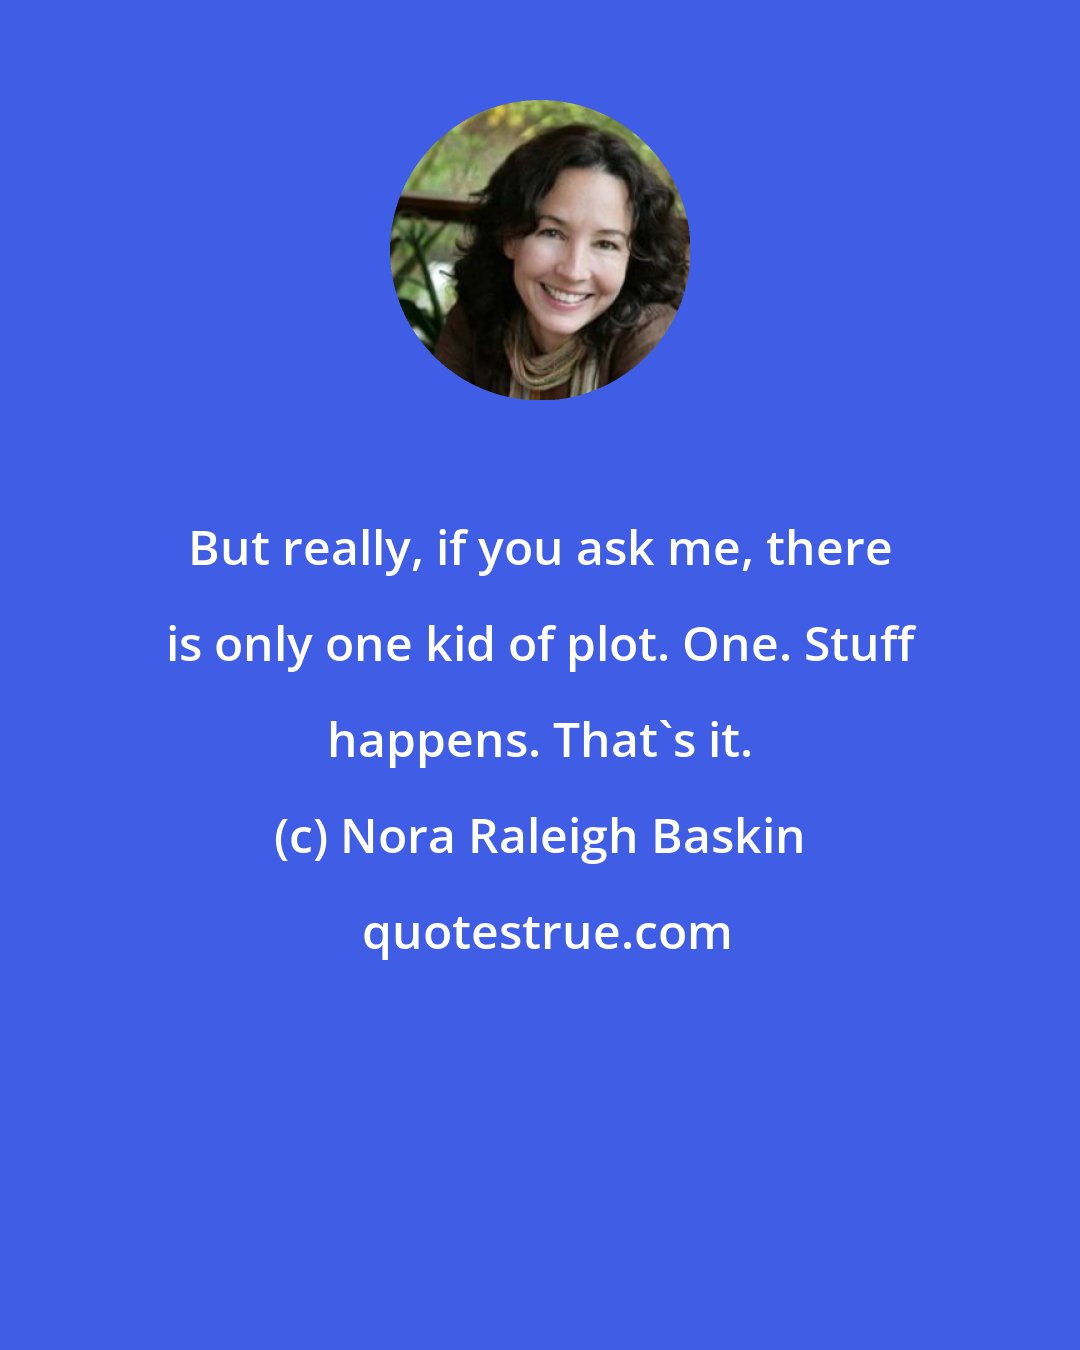 Nora Raleigh Baskin: But really, if you ask me, there is only one kid of plot. One. Stuff happens. That's it.